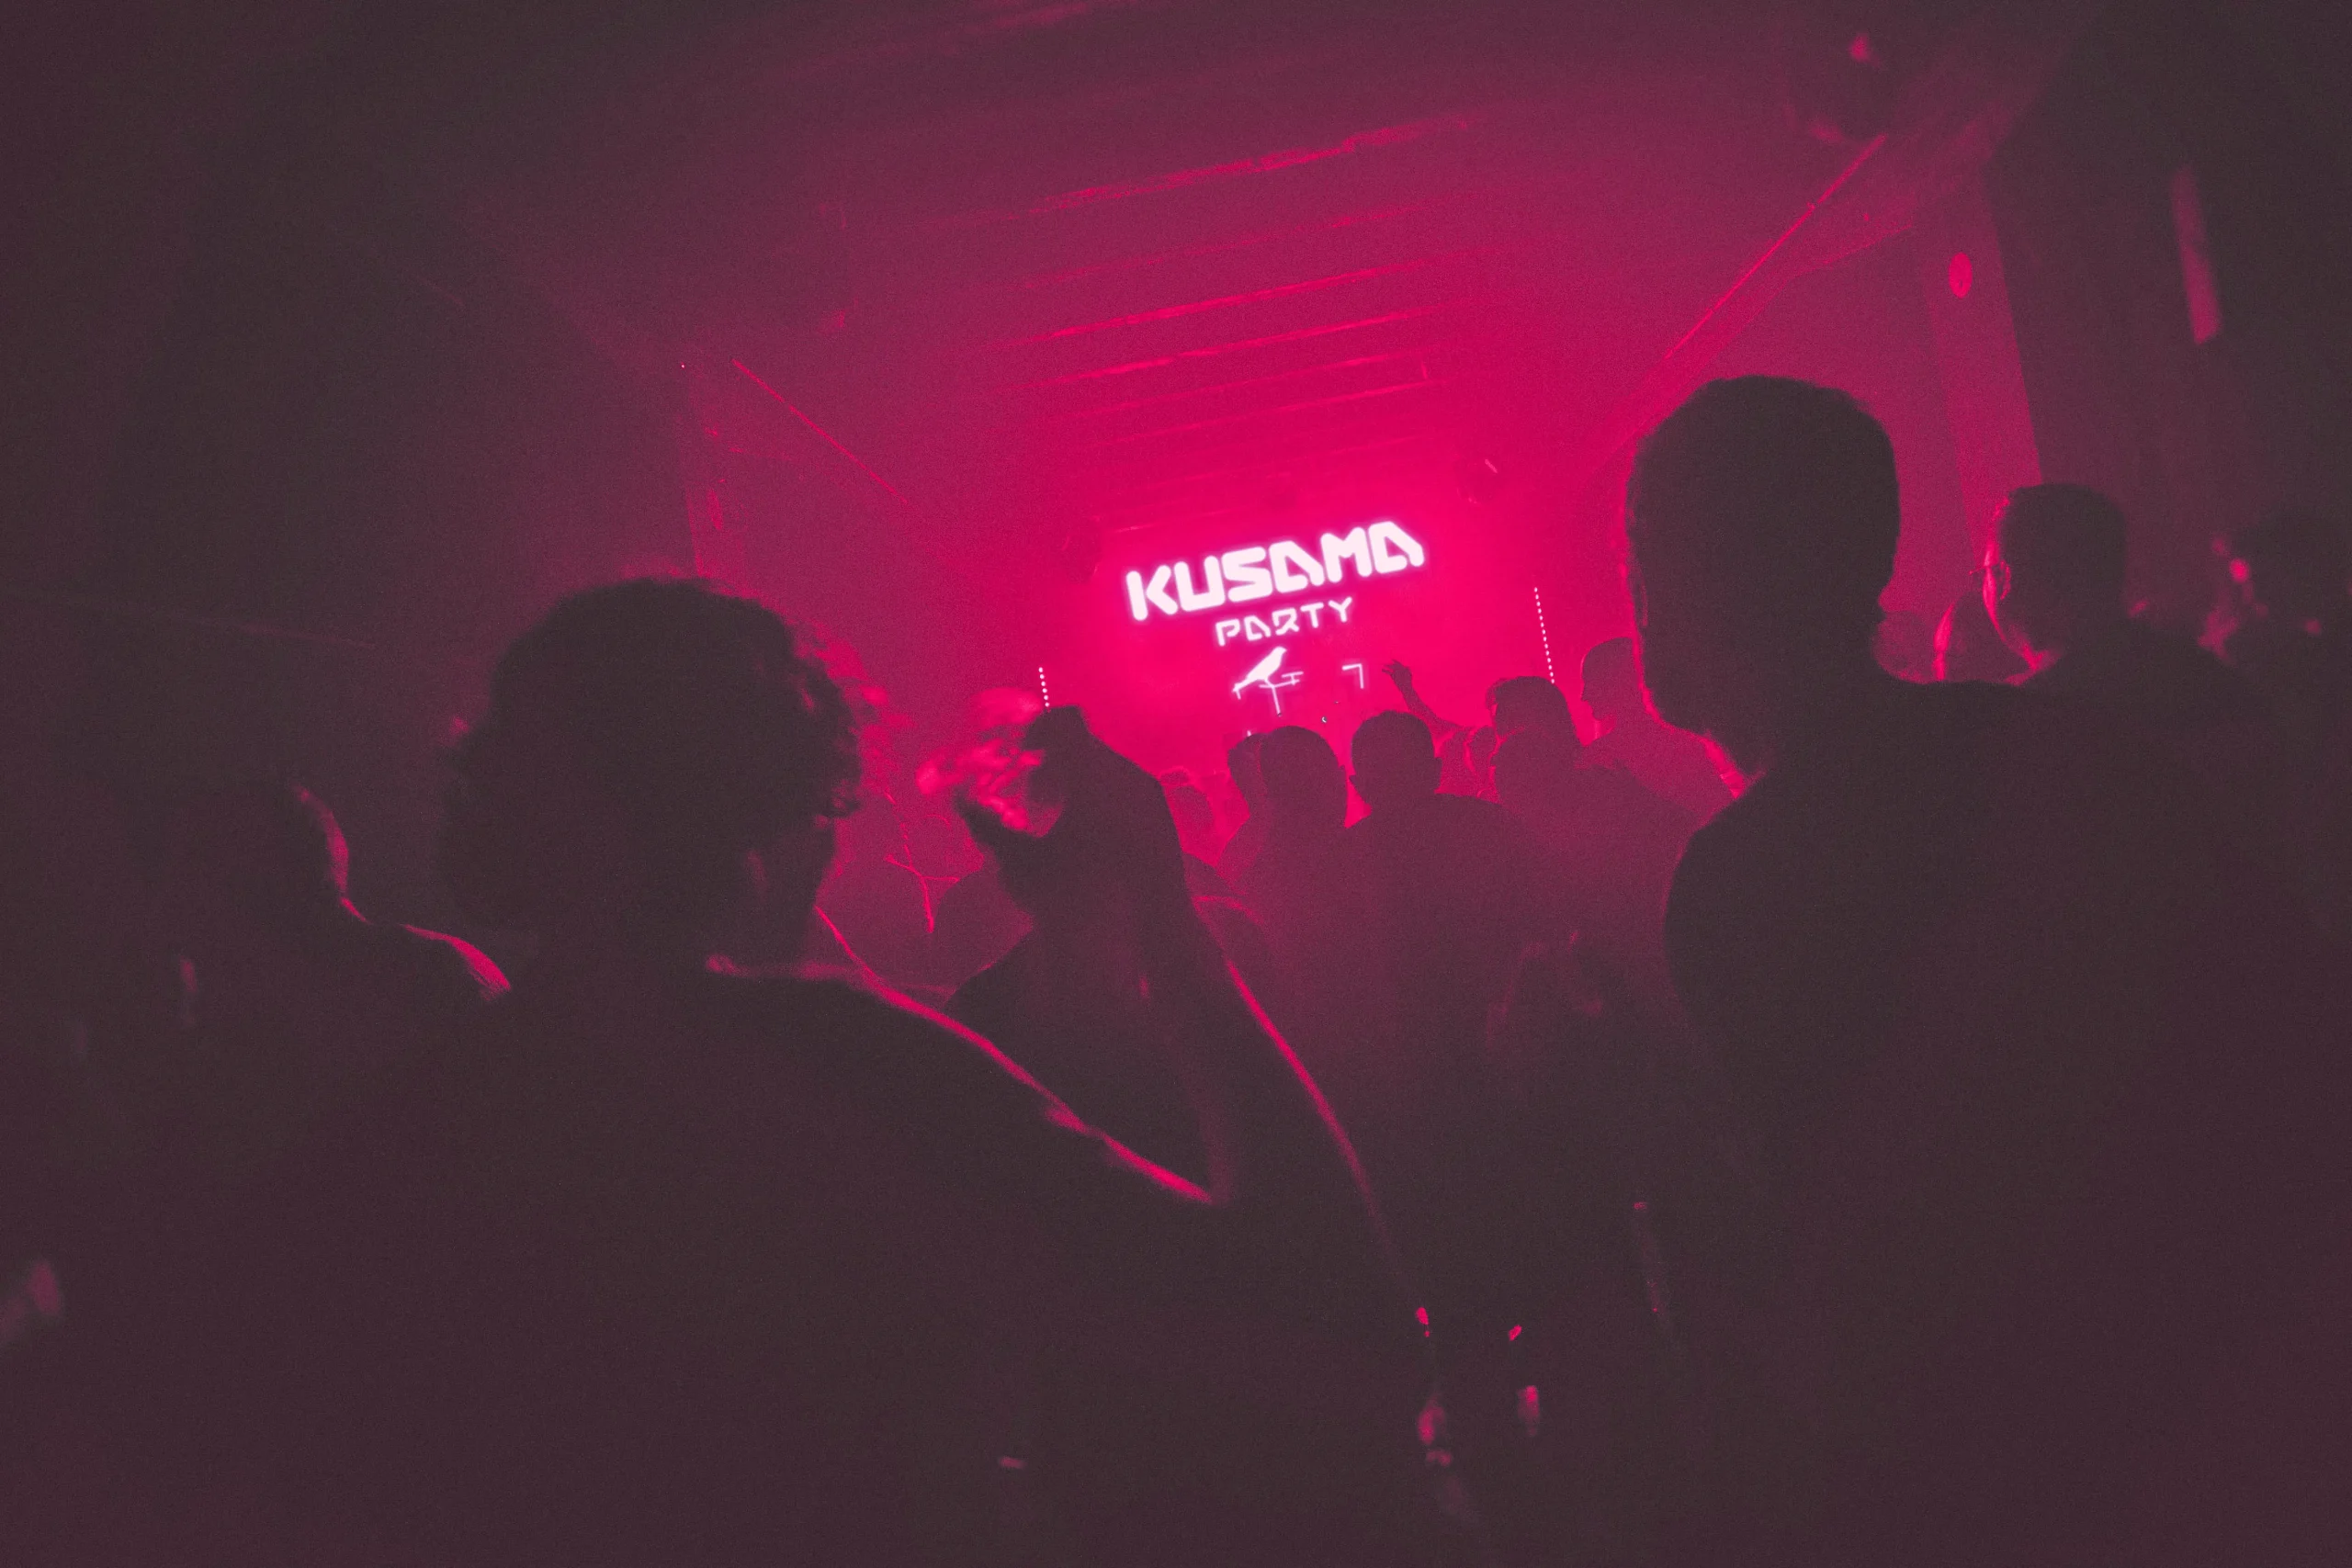 Attendees enjoying a pop-up blockchain meetup party for the Kusama blockchain, part of the Polkadot ecosystem, under vibrant purple red lighting.